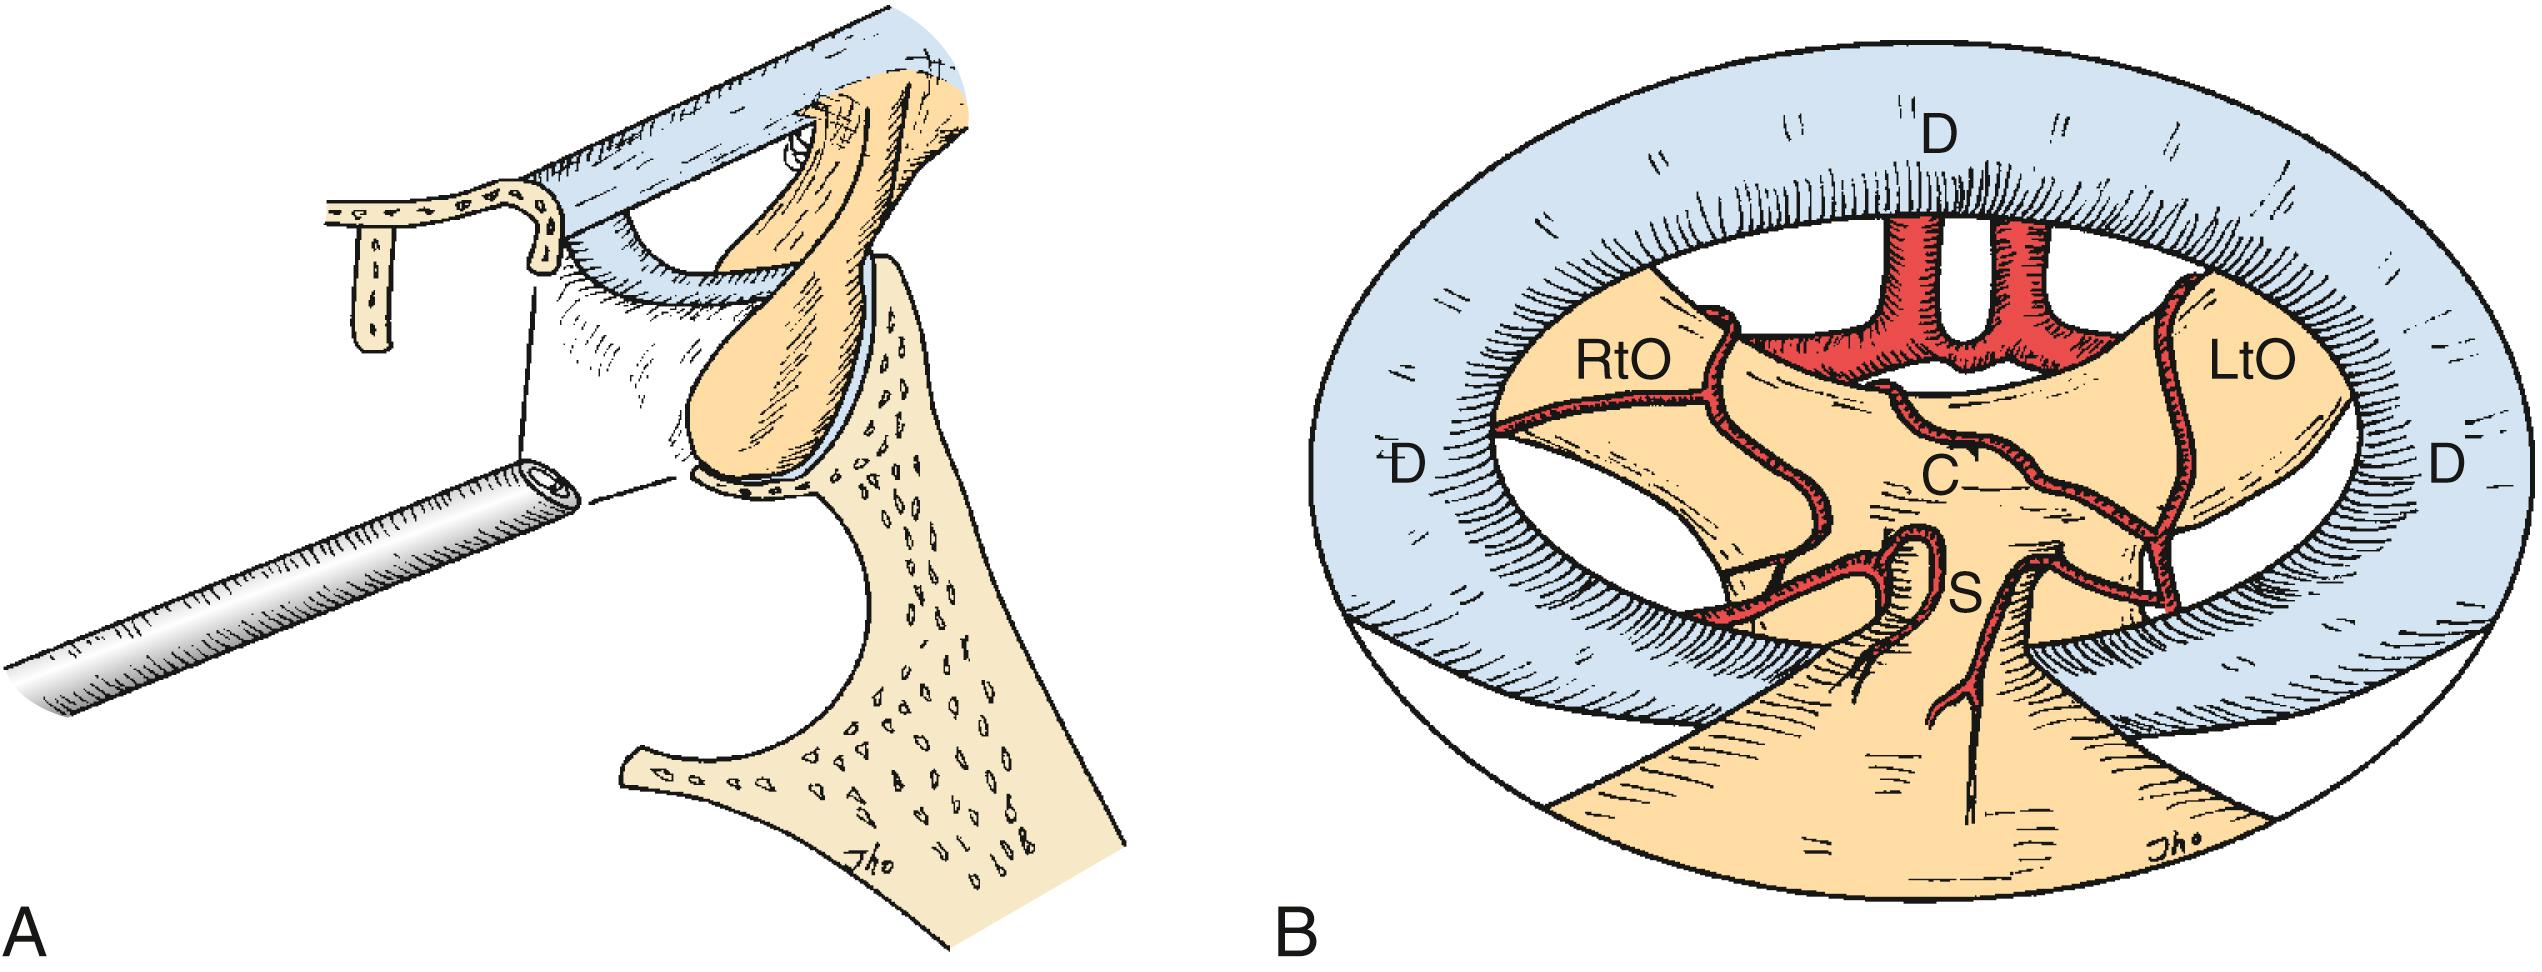 FIGURE 15.3, Schematic drawings show angled views with the 30-degree-lens endoscope directed toward the suprasellar region (A and B). The 30-degree-lens endoscopic view discloses the anterior cerebral artery, optic chiasm (C) , diaphragma sella (D) , left optic nerve (LtO) , right optic nerve (RtO) , and pituitary stalk (S) .